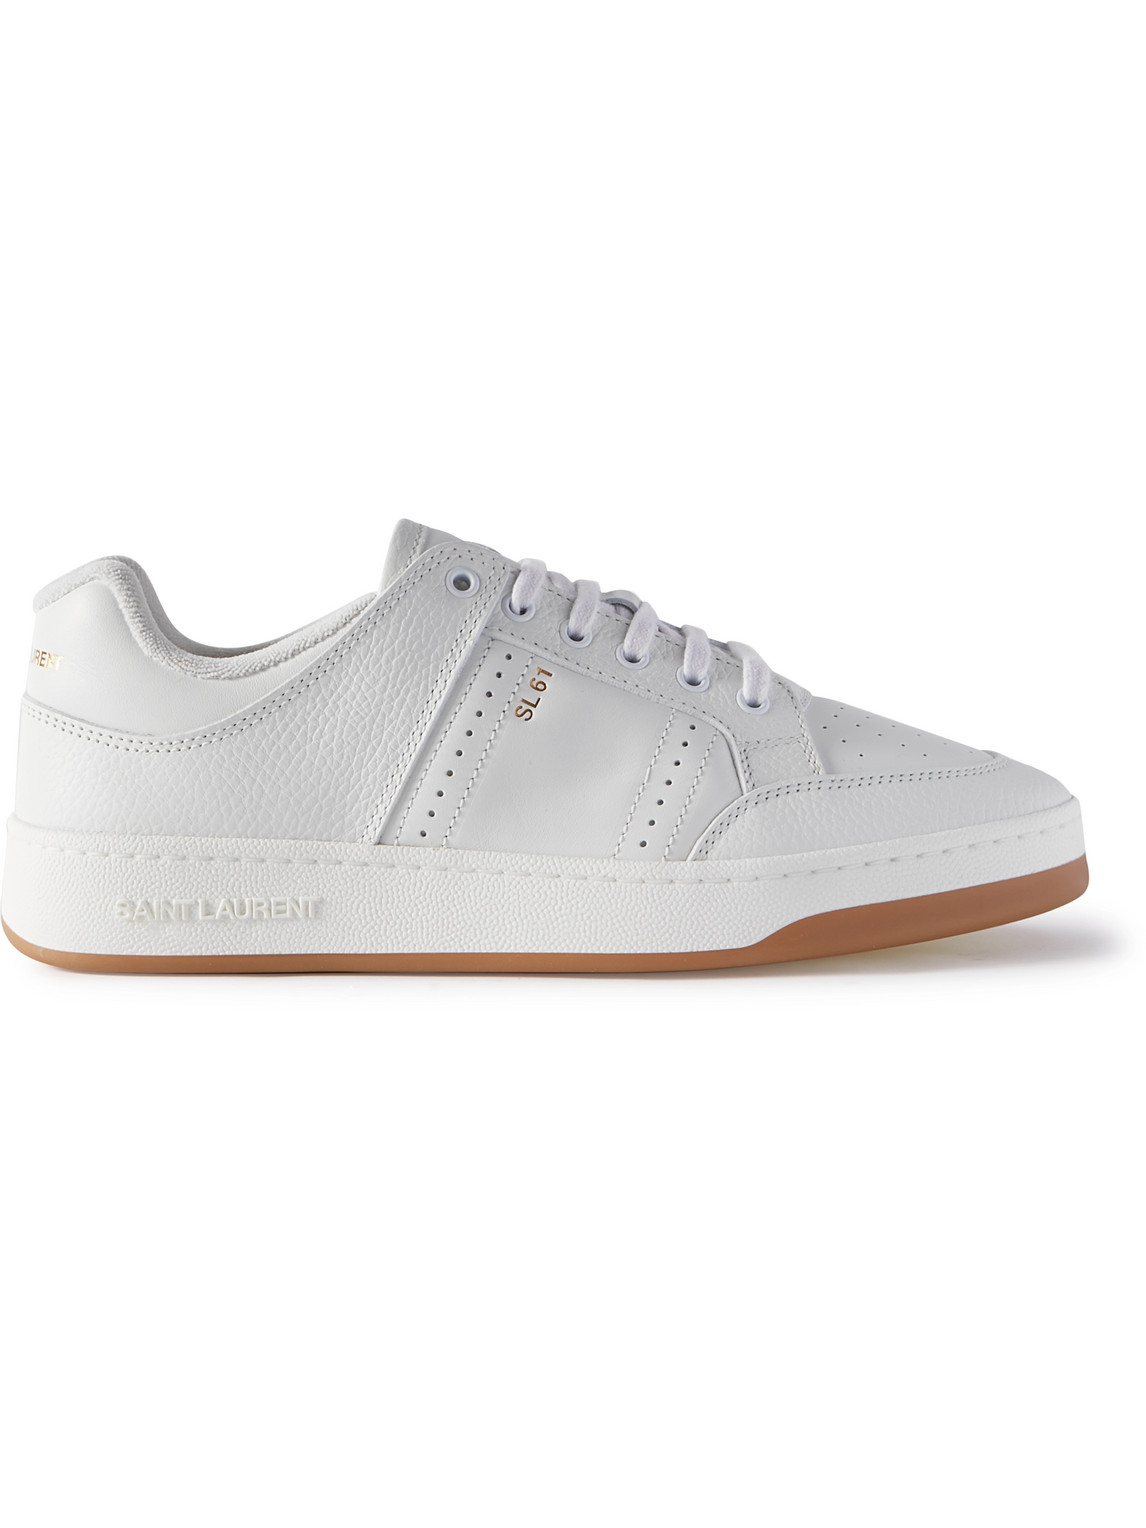 SL/61 low-top sneakers in perforated leather, Saint Laurent